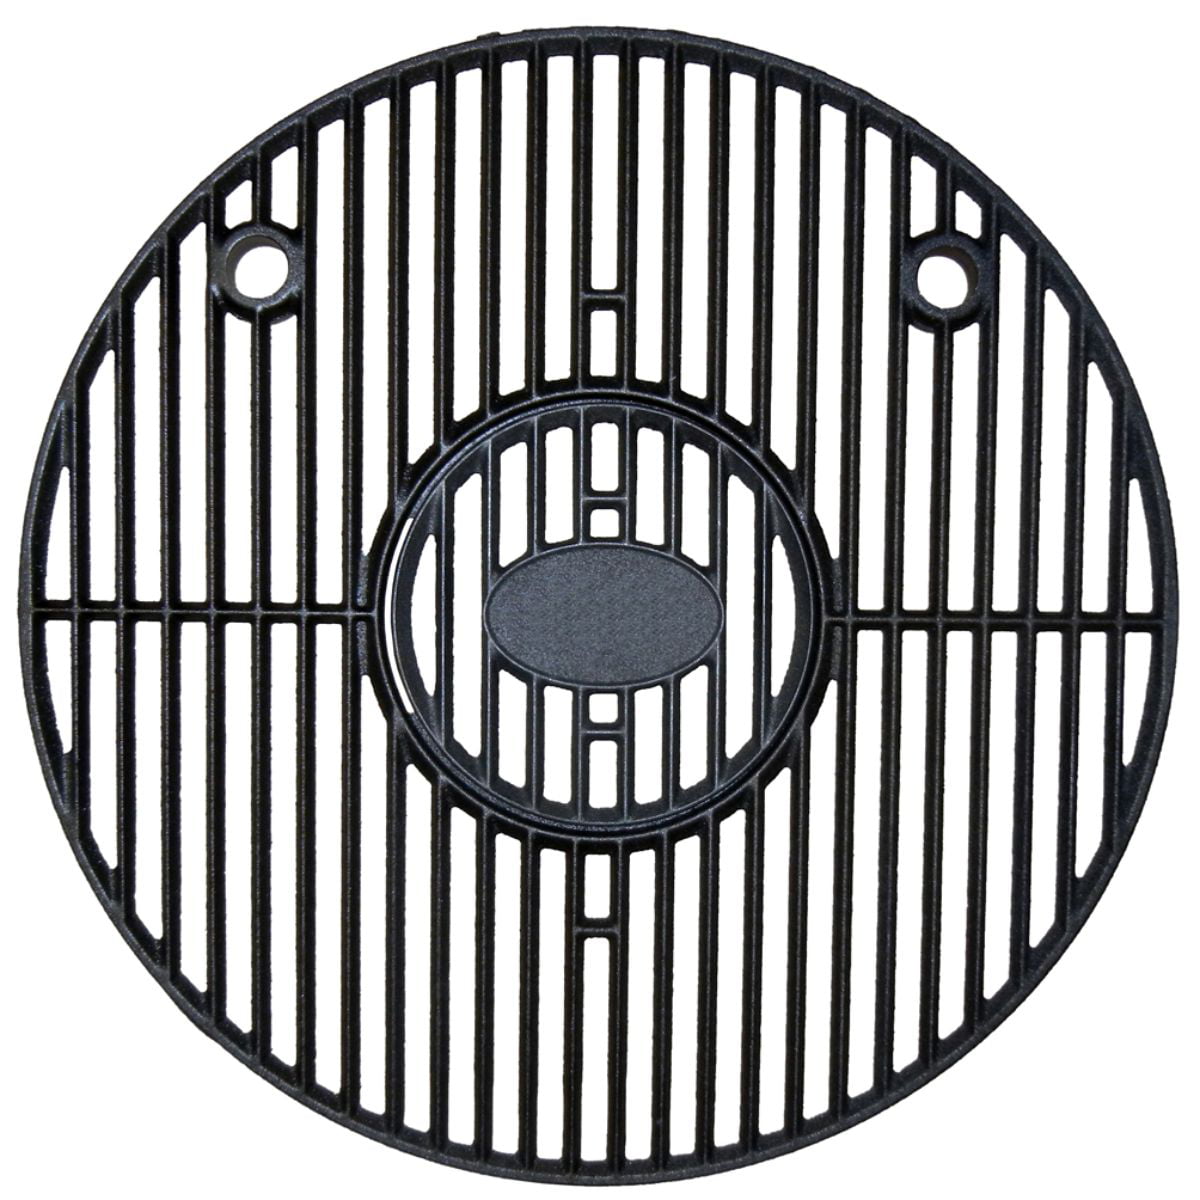 2-pc cast iron cooking grid set for Chargriller brand gas grills